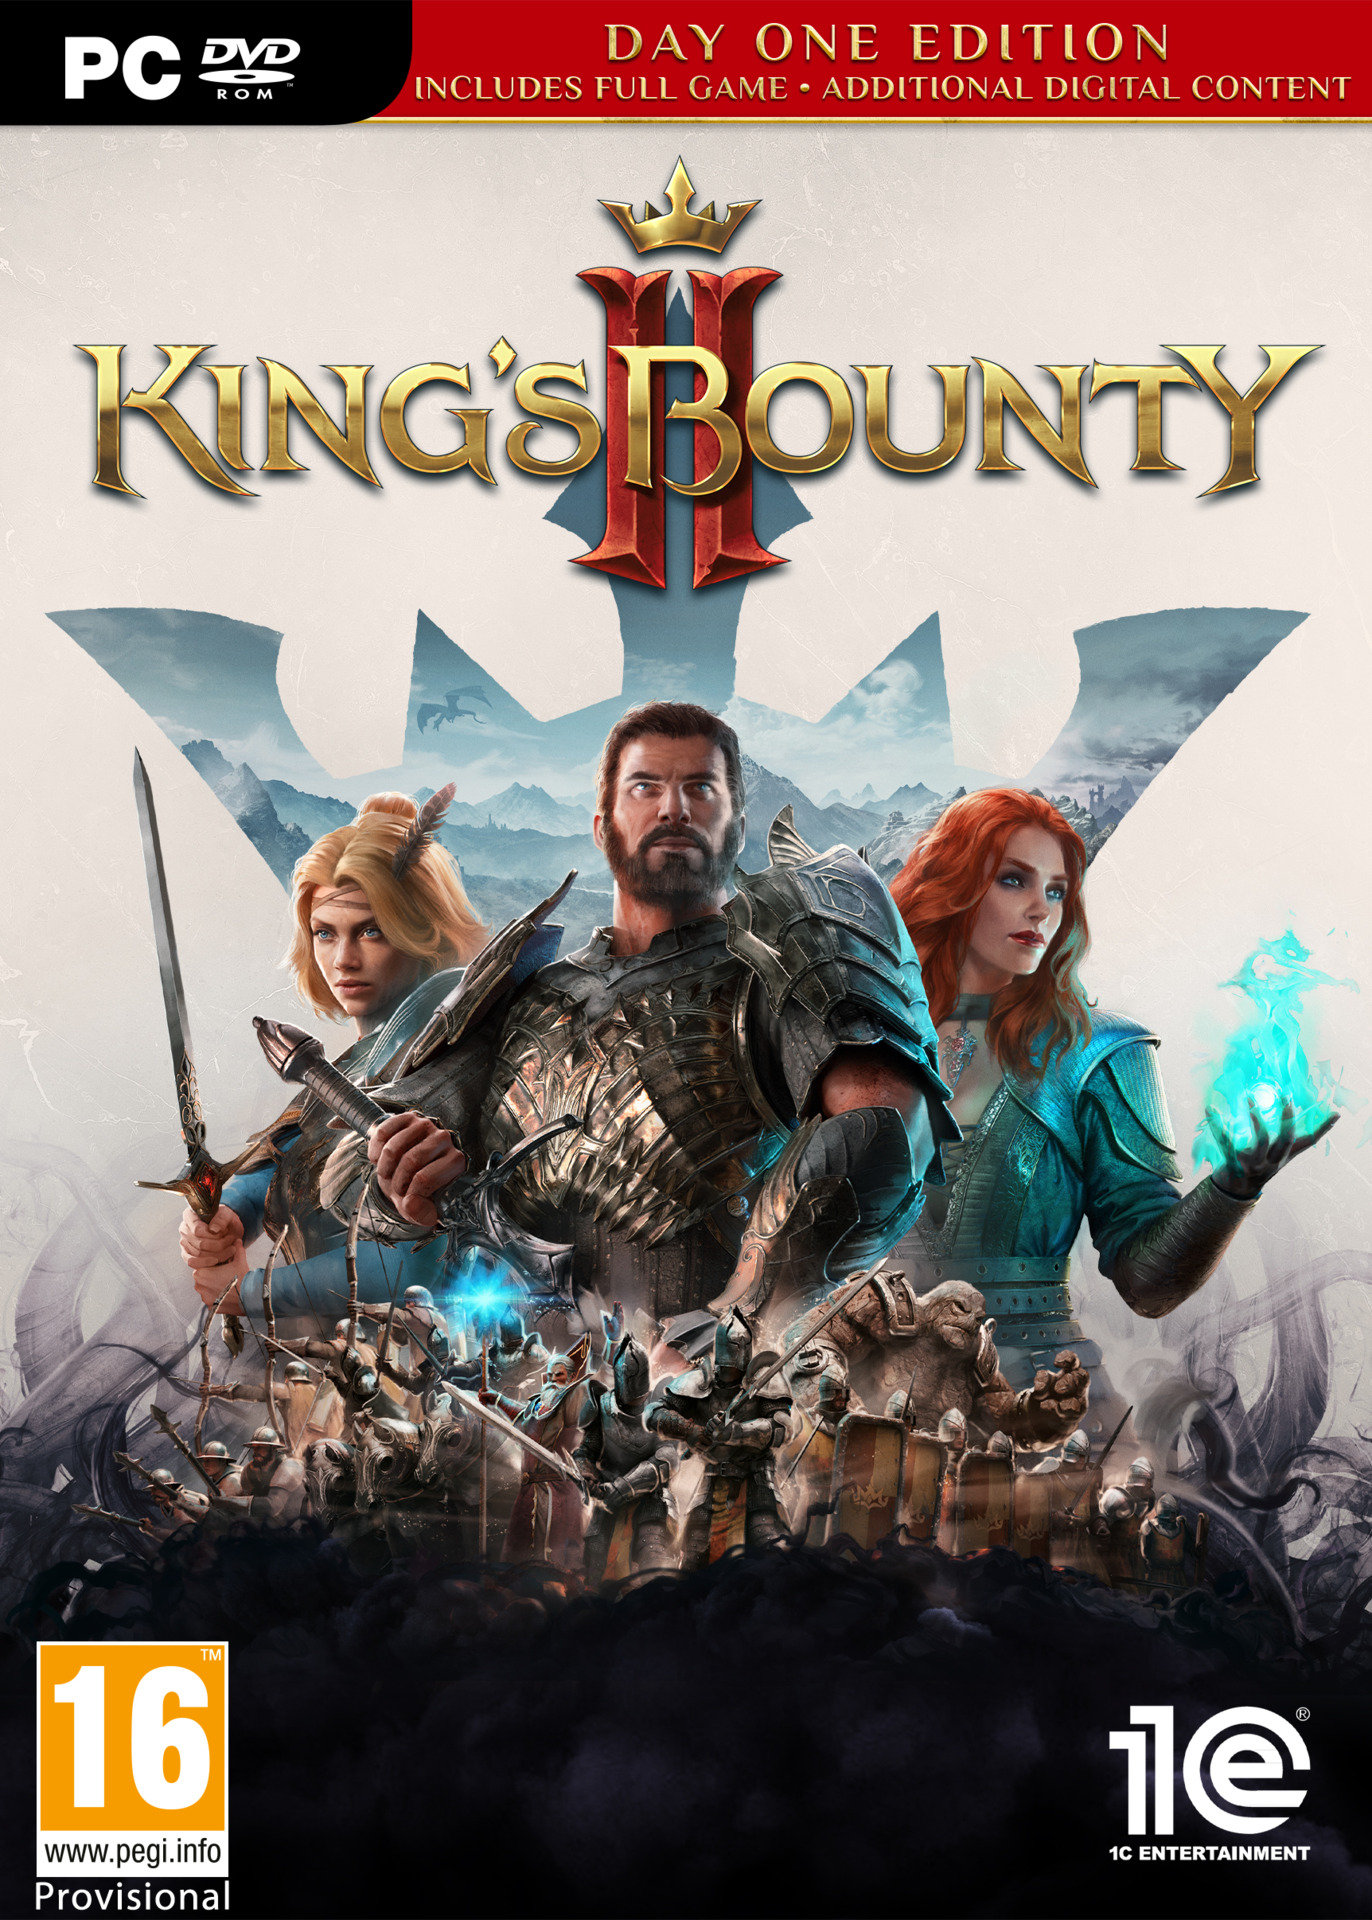 Kings Bounty 2 - Day One Edition